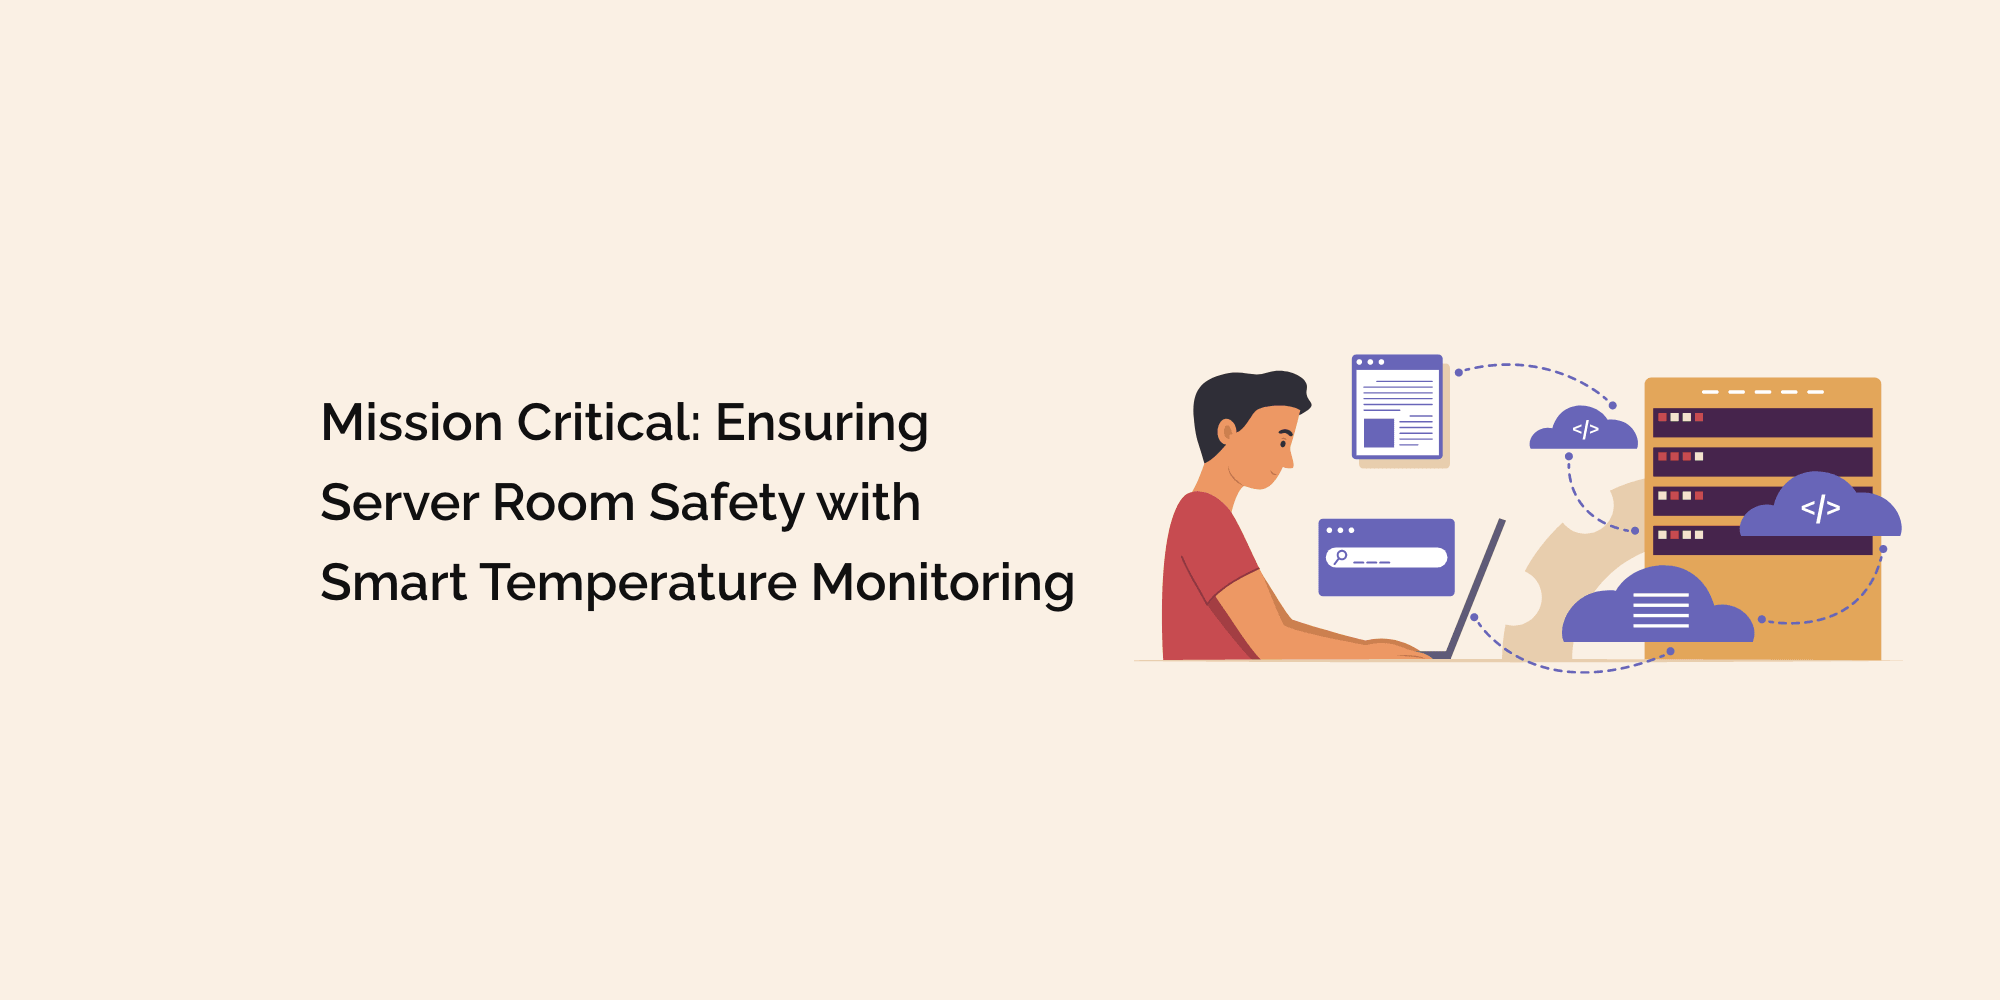 Mission Critical: Ensuring Server Room Safety with Smart Temperature Monitoring